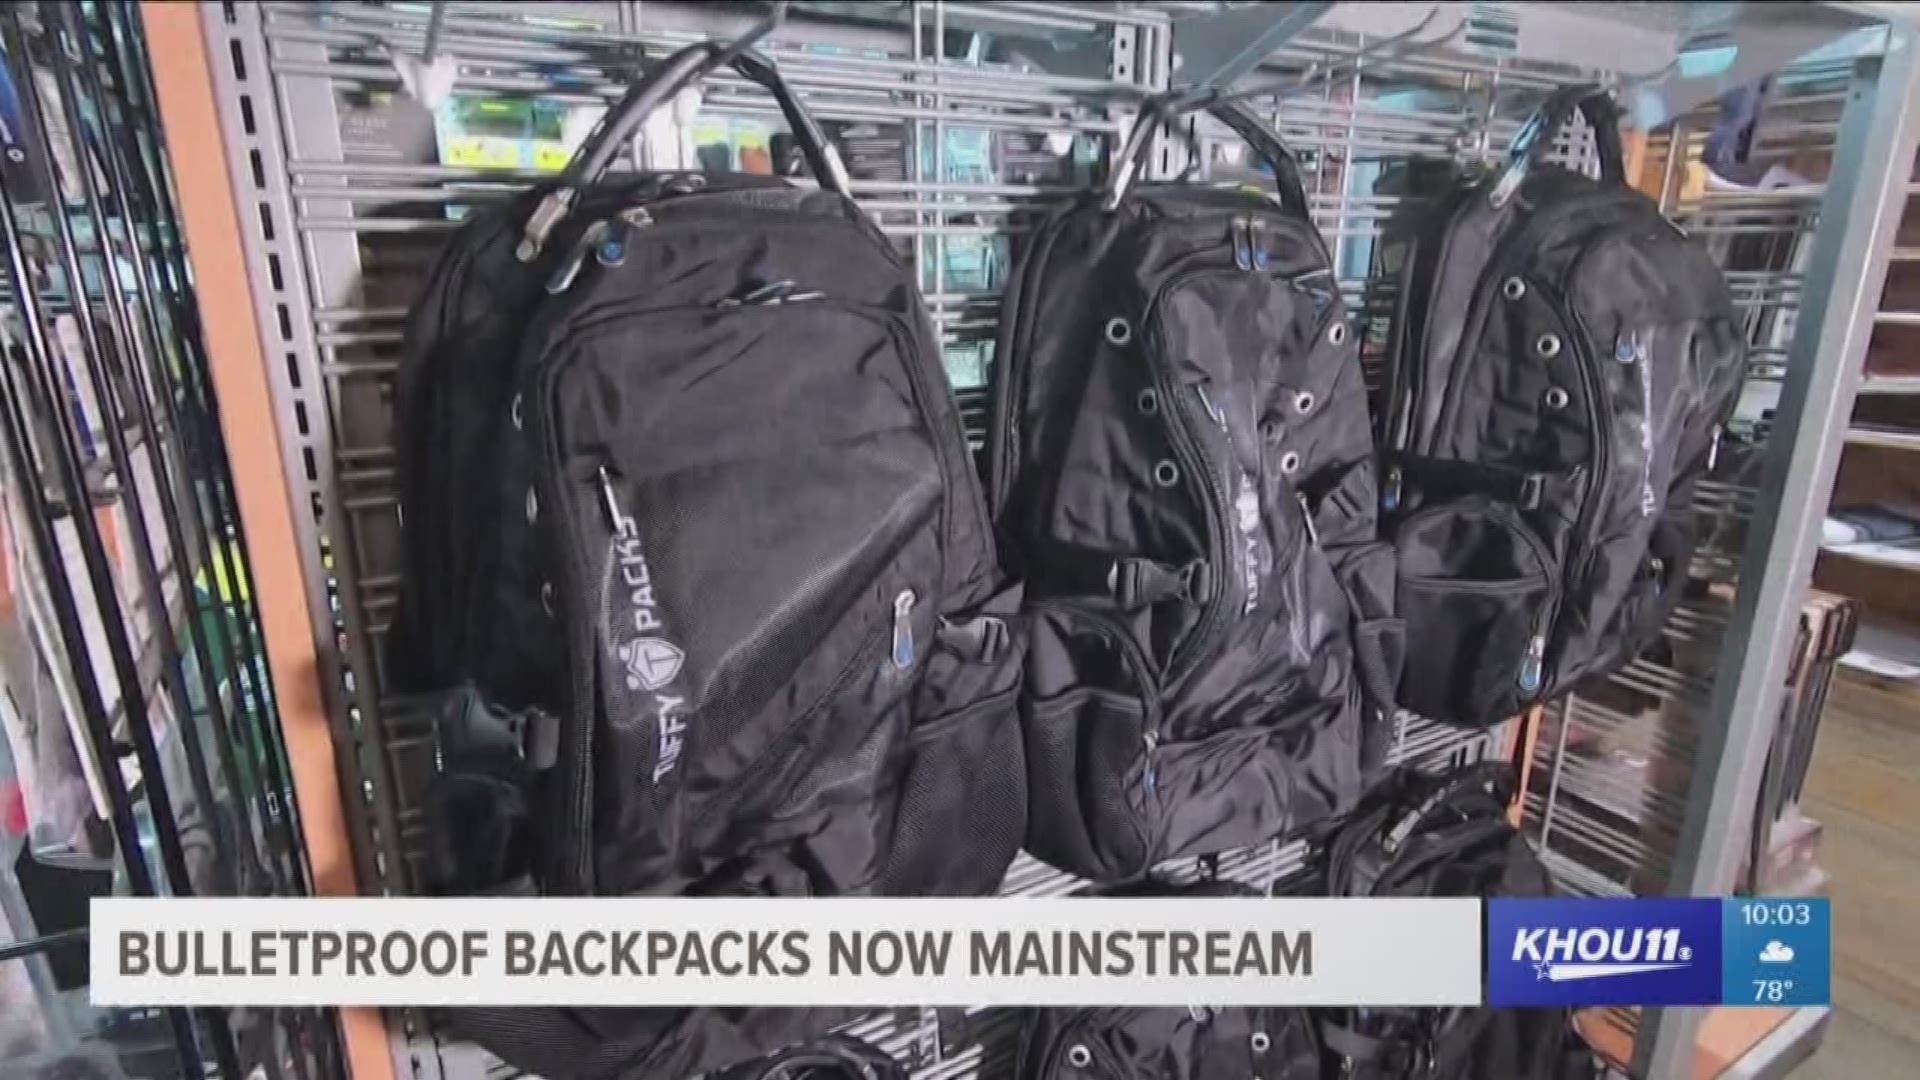 Bulletproof backpacks, designed to protect children in the event of a school shooting, are becoming mainstream. Major retailers like Walmart and Home Depot are selling the backpacks online while gun ranges sell them in stores. 